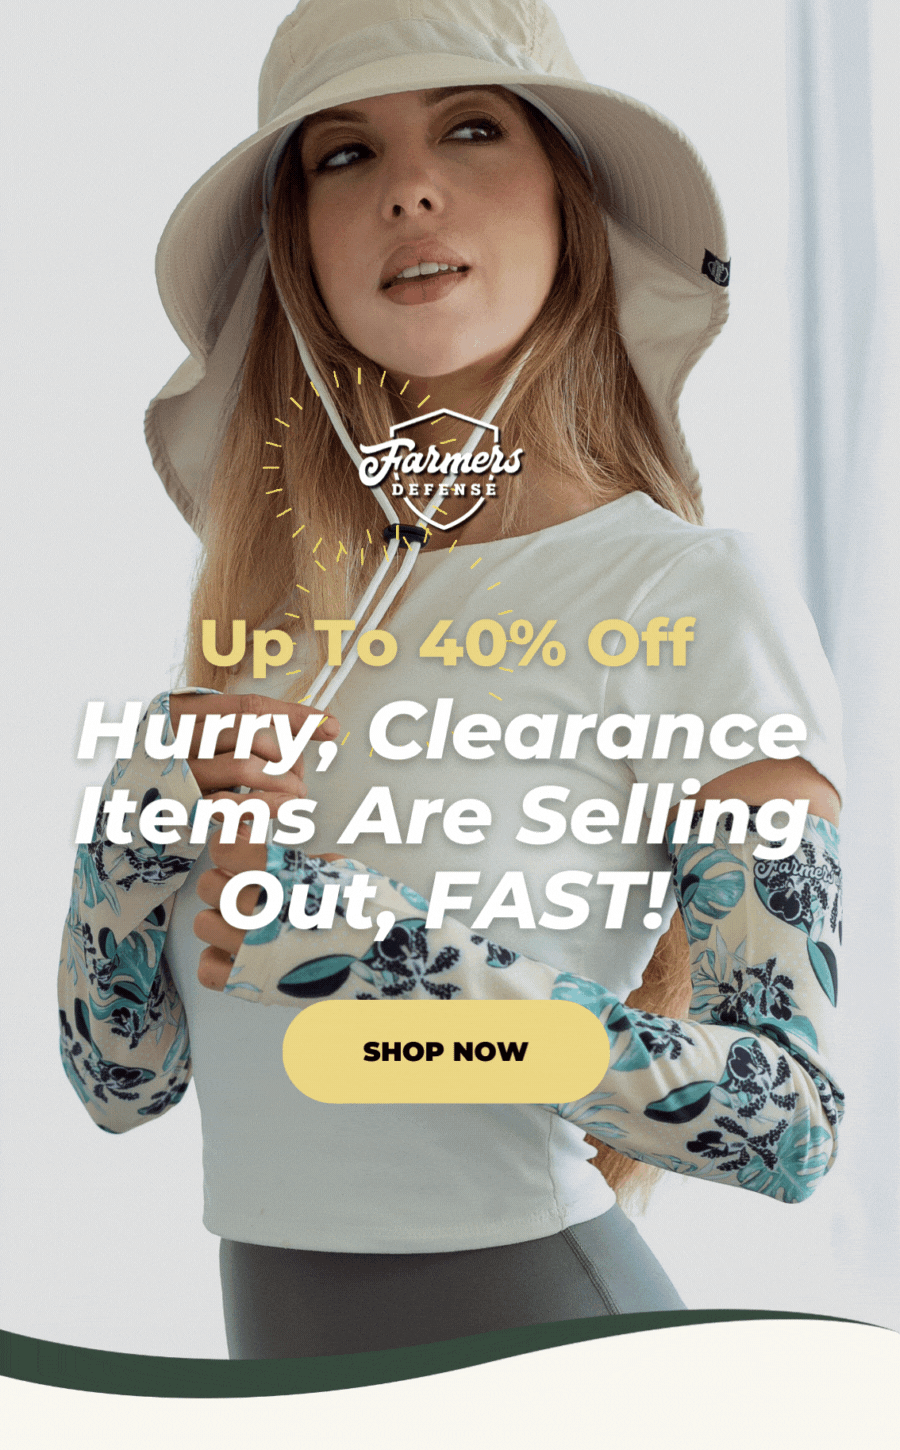 Up To 40% Off. Hurry, Clearance Items Are Selling Out, FAST!